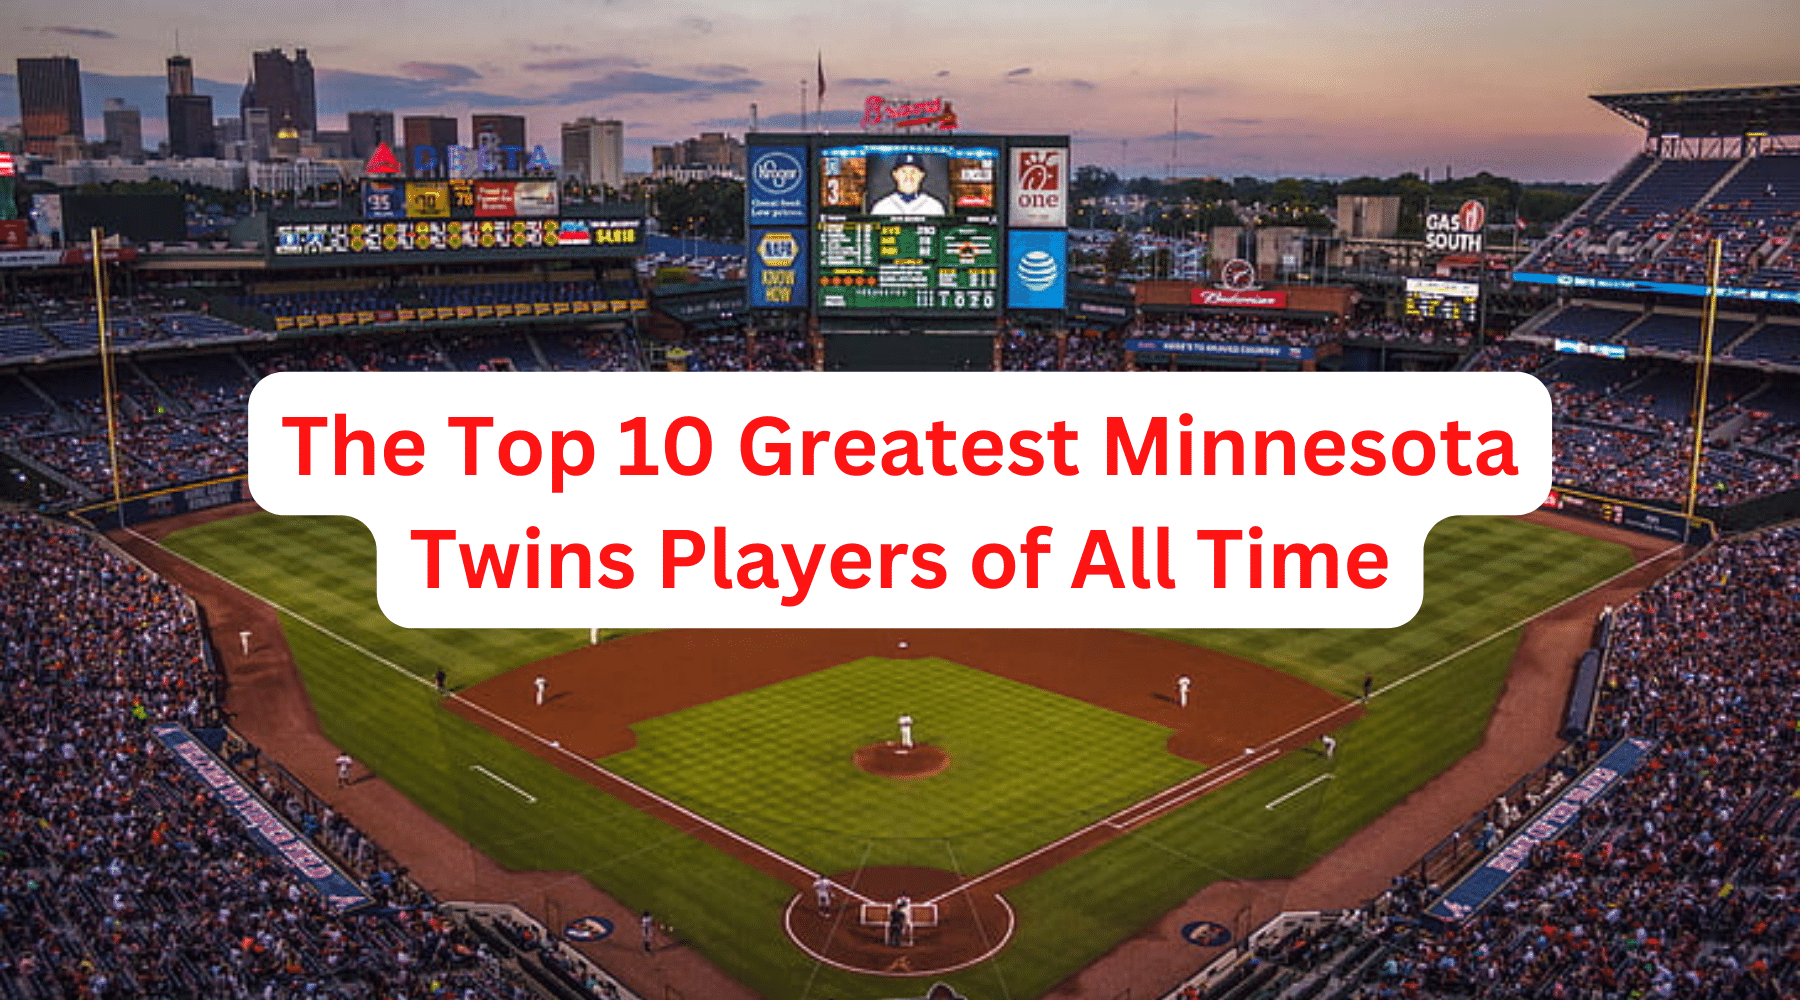 The Top 10 Greatest Minnesota Twins Players of All Time